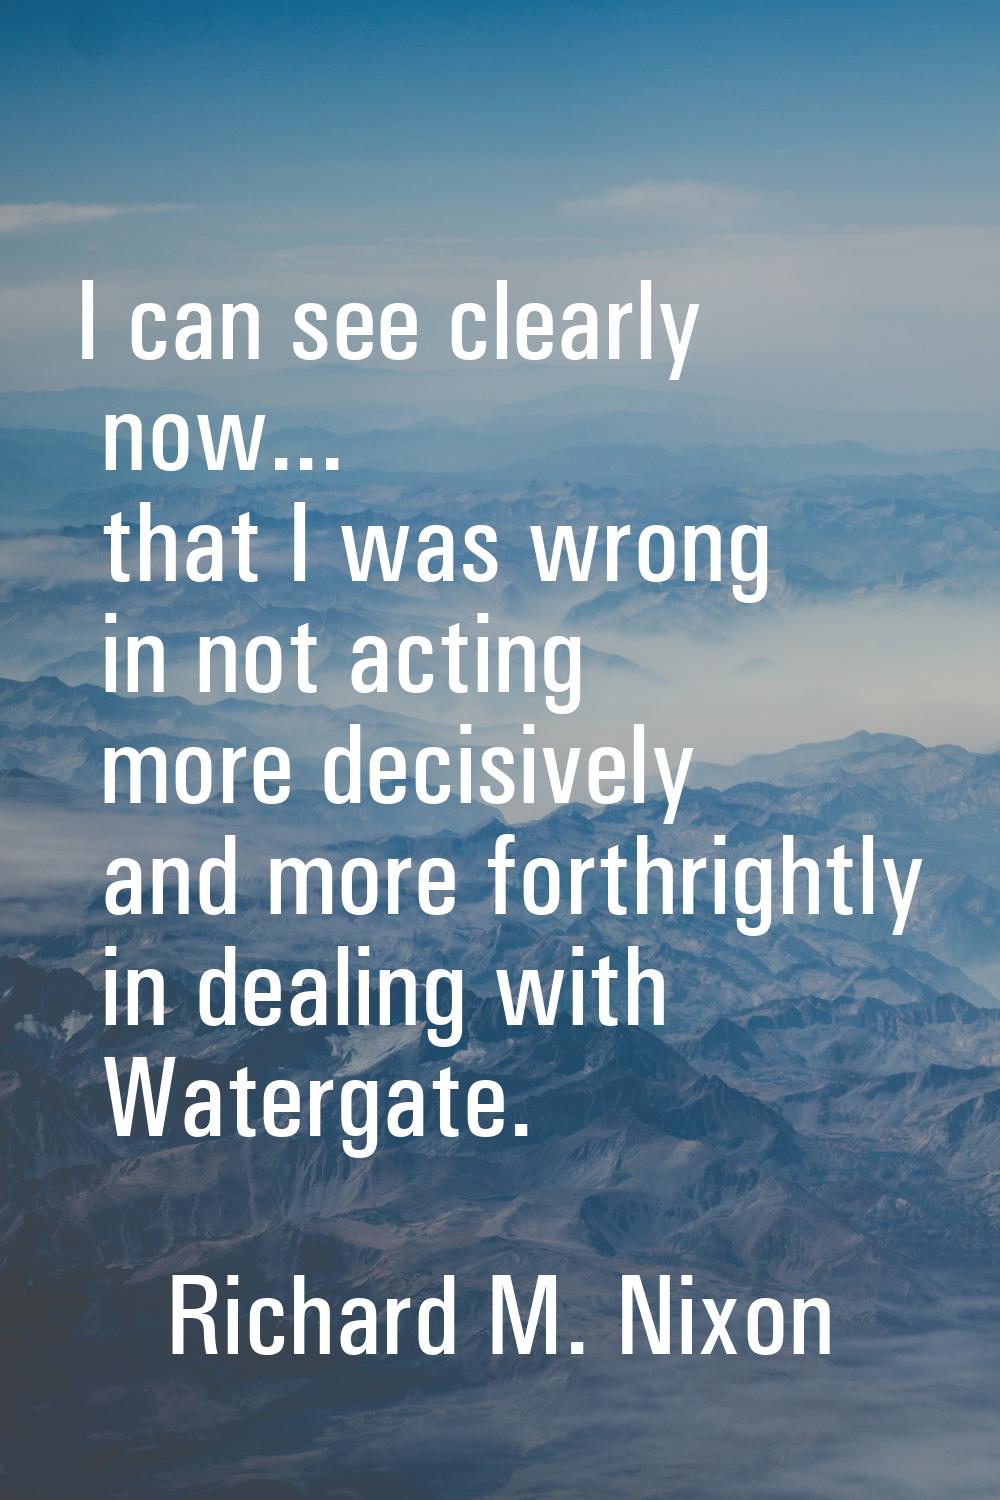 I can see clearly now... that I was wrong in not acting more decisively and more forthrightly in de